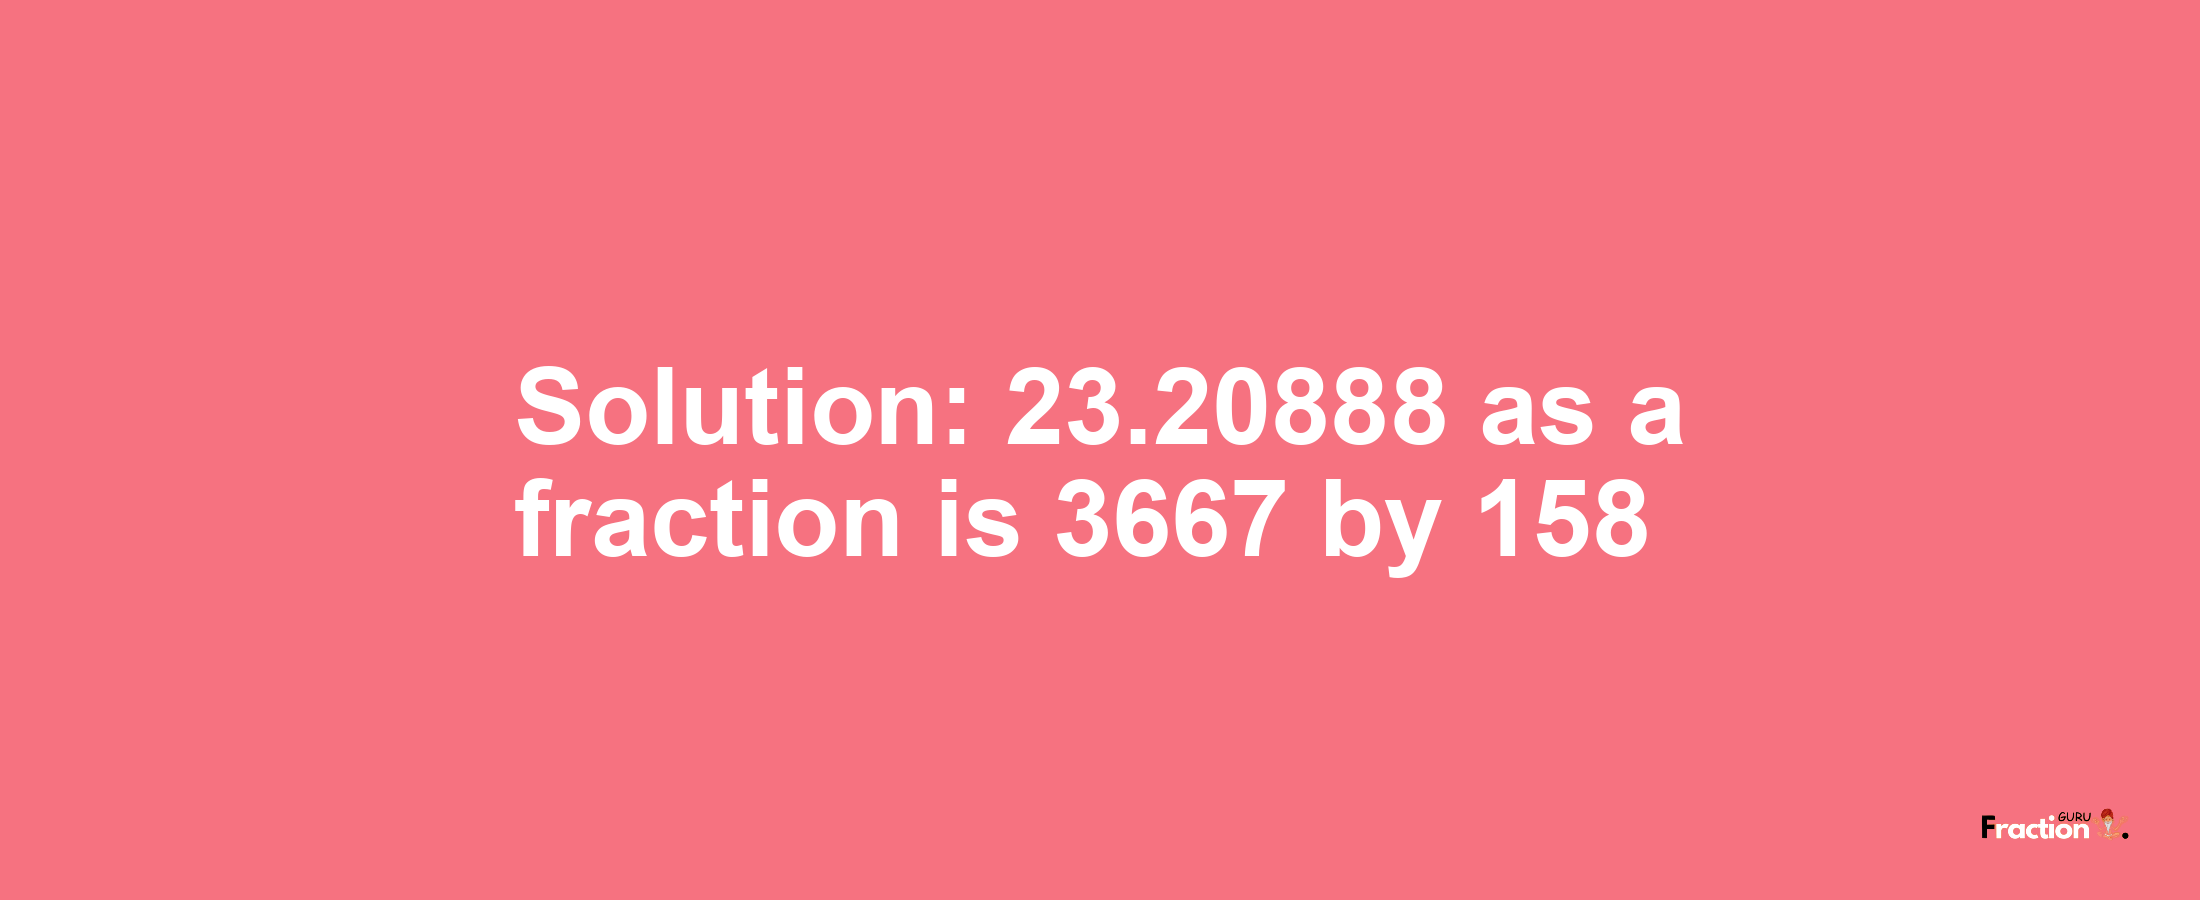 Solution:23.20888 as a fraction is 3667/158